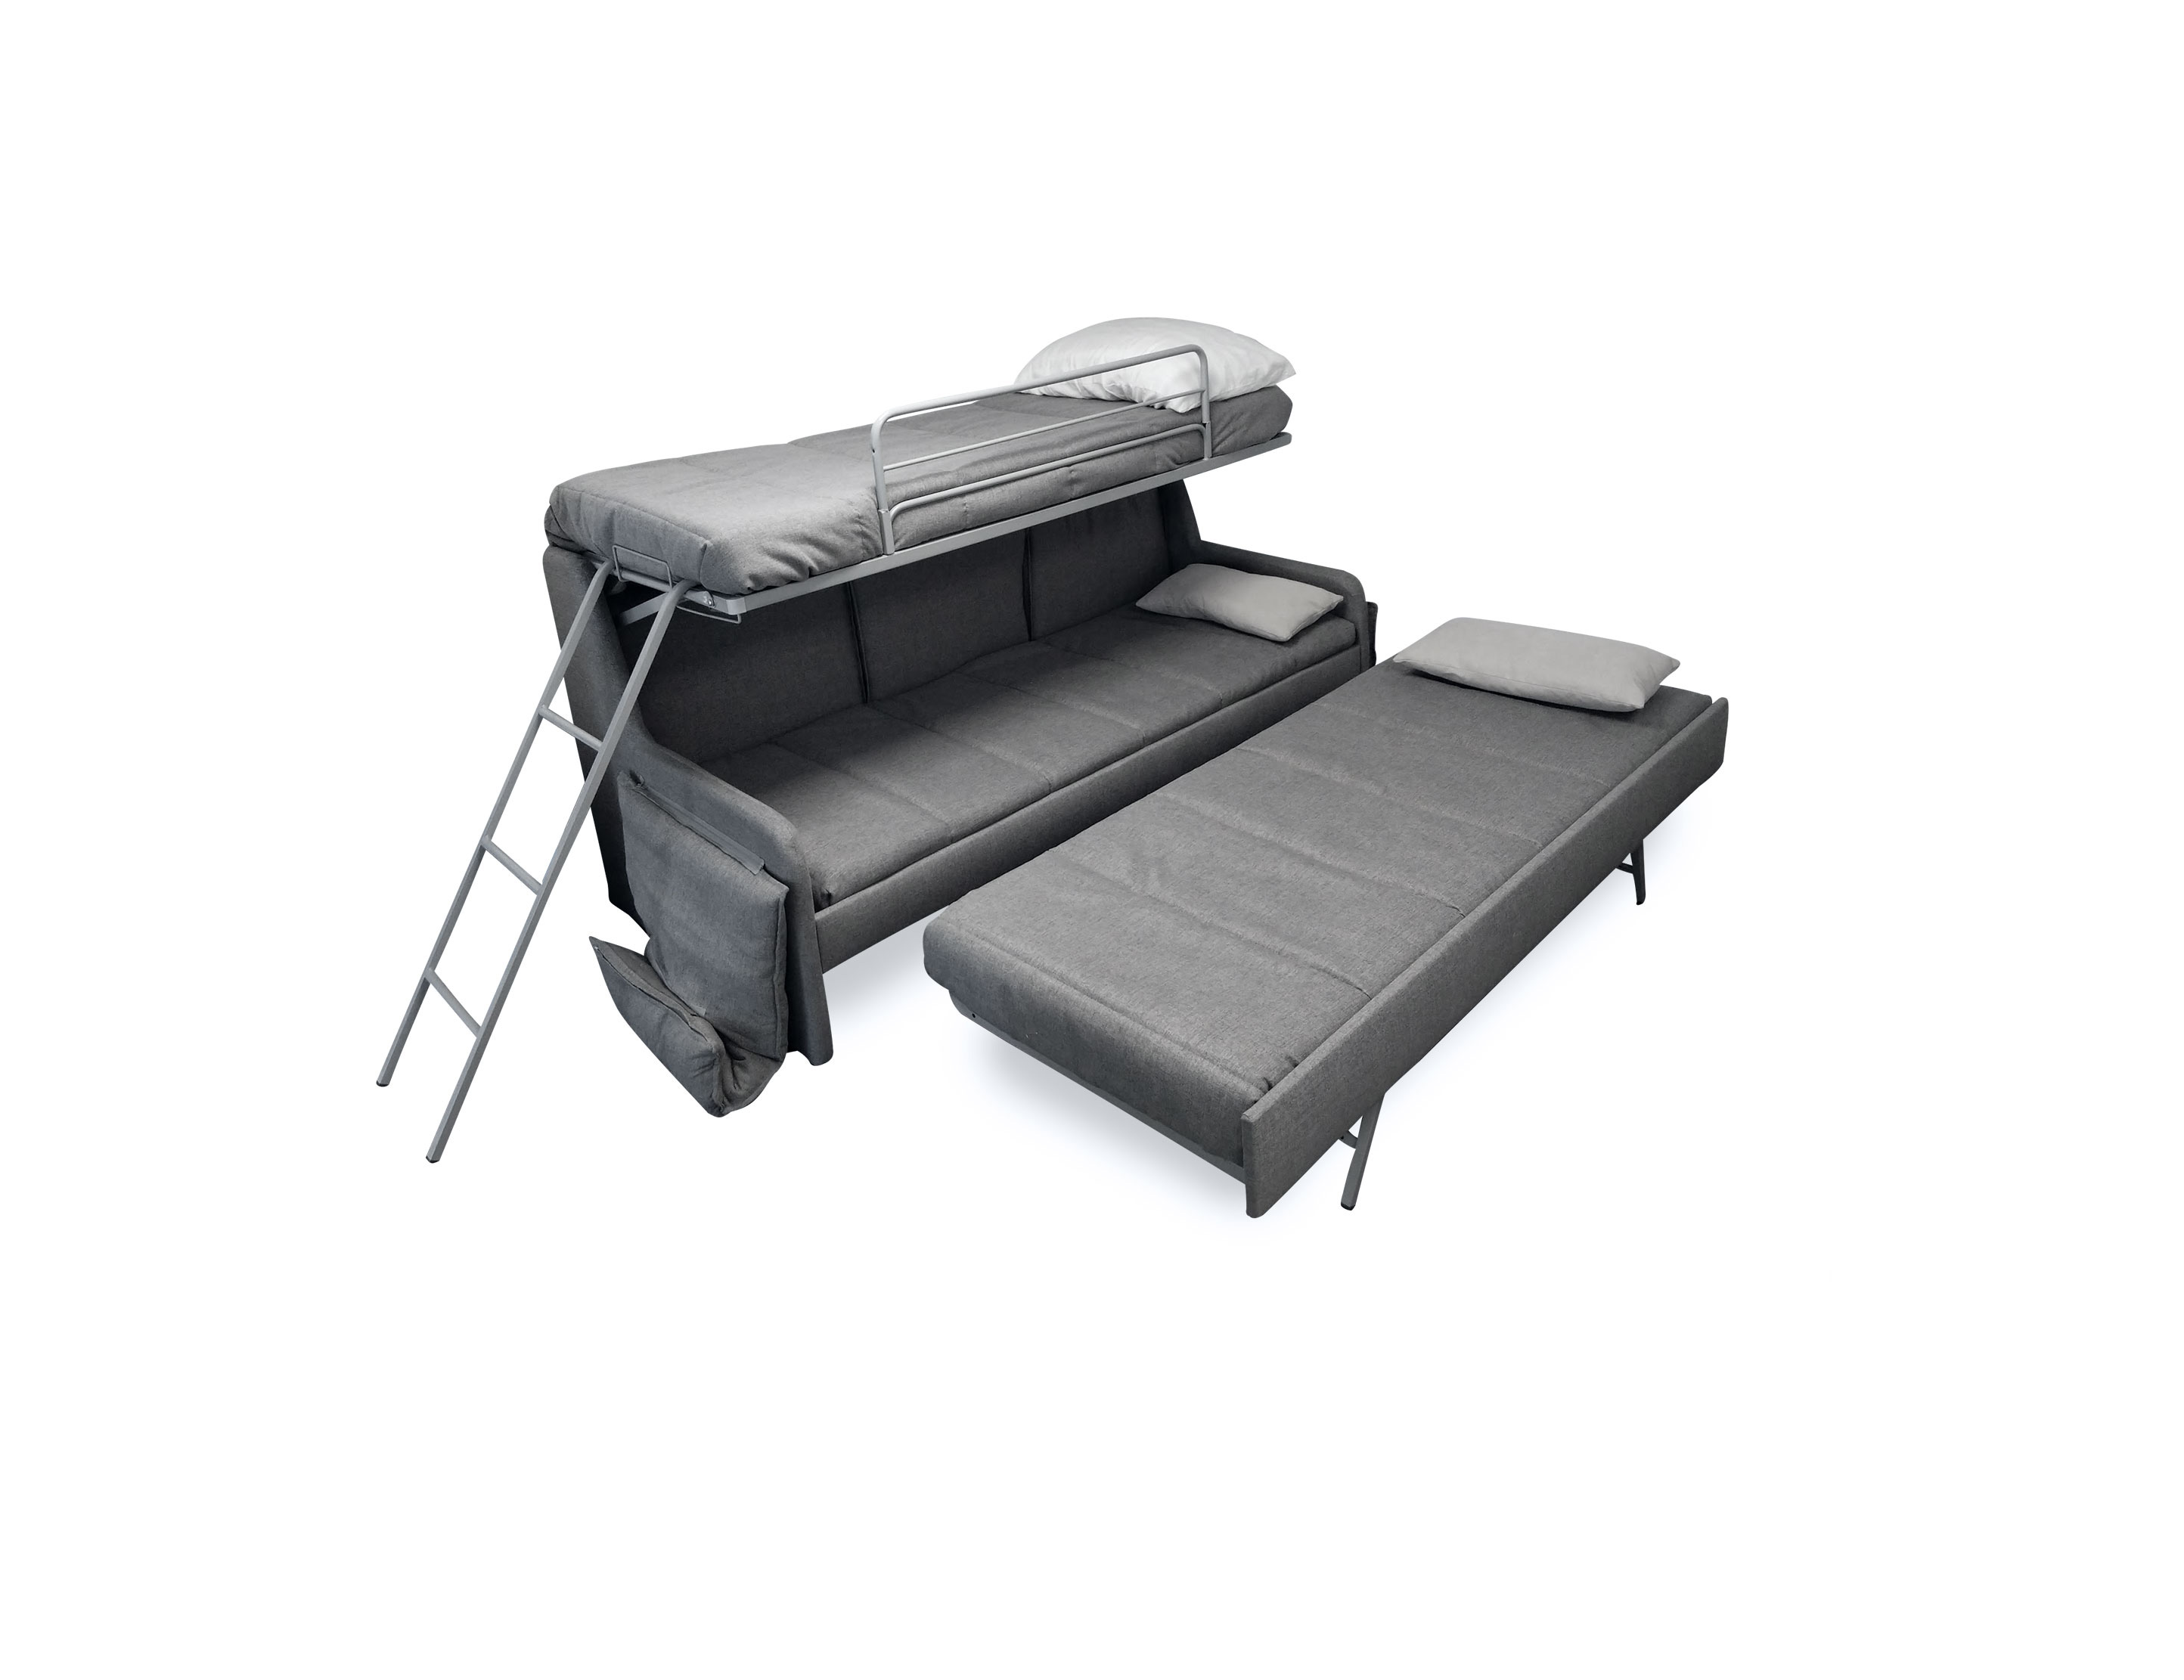 Transforming Sofa Bunk Bed Expand, Collapsible Bunk Bed Couch